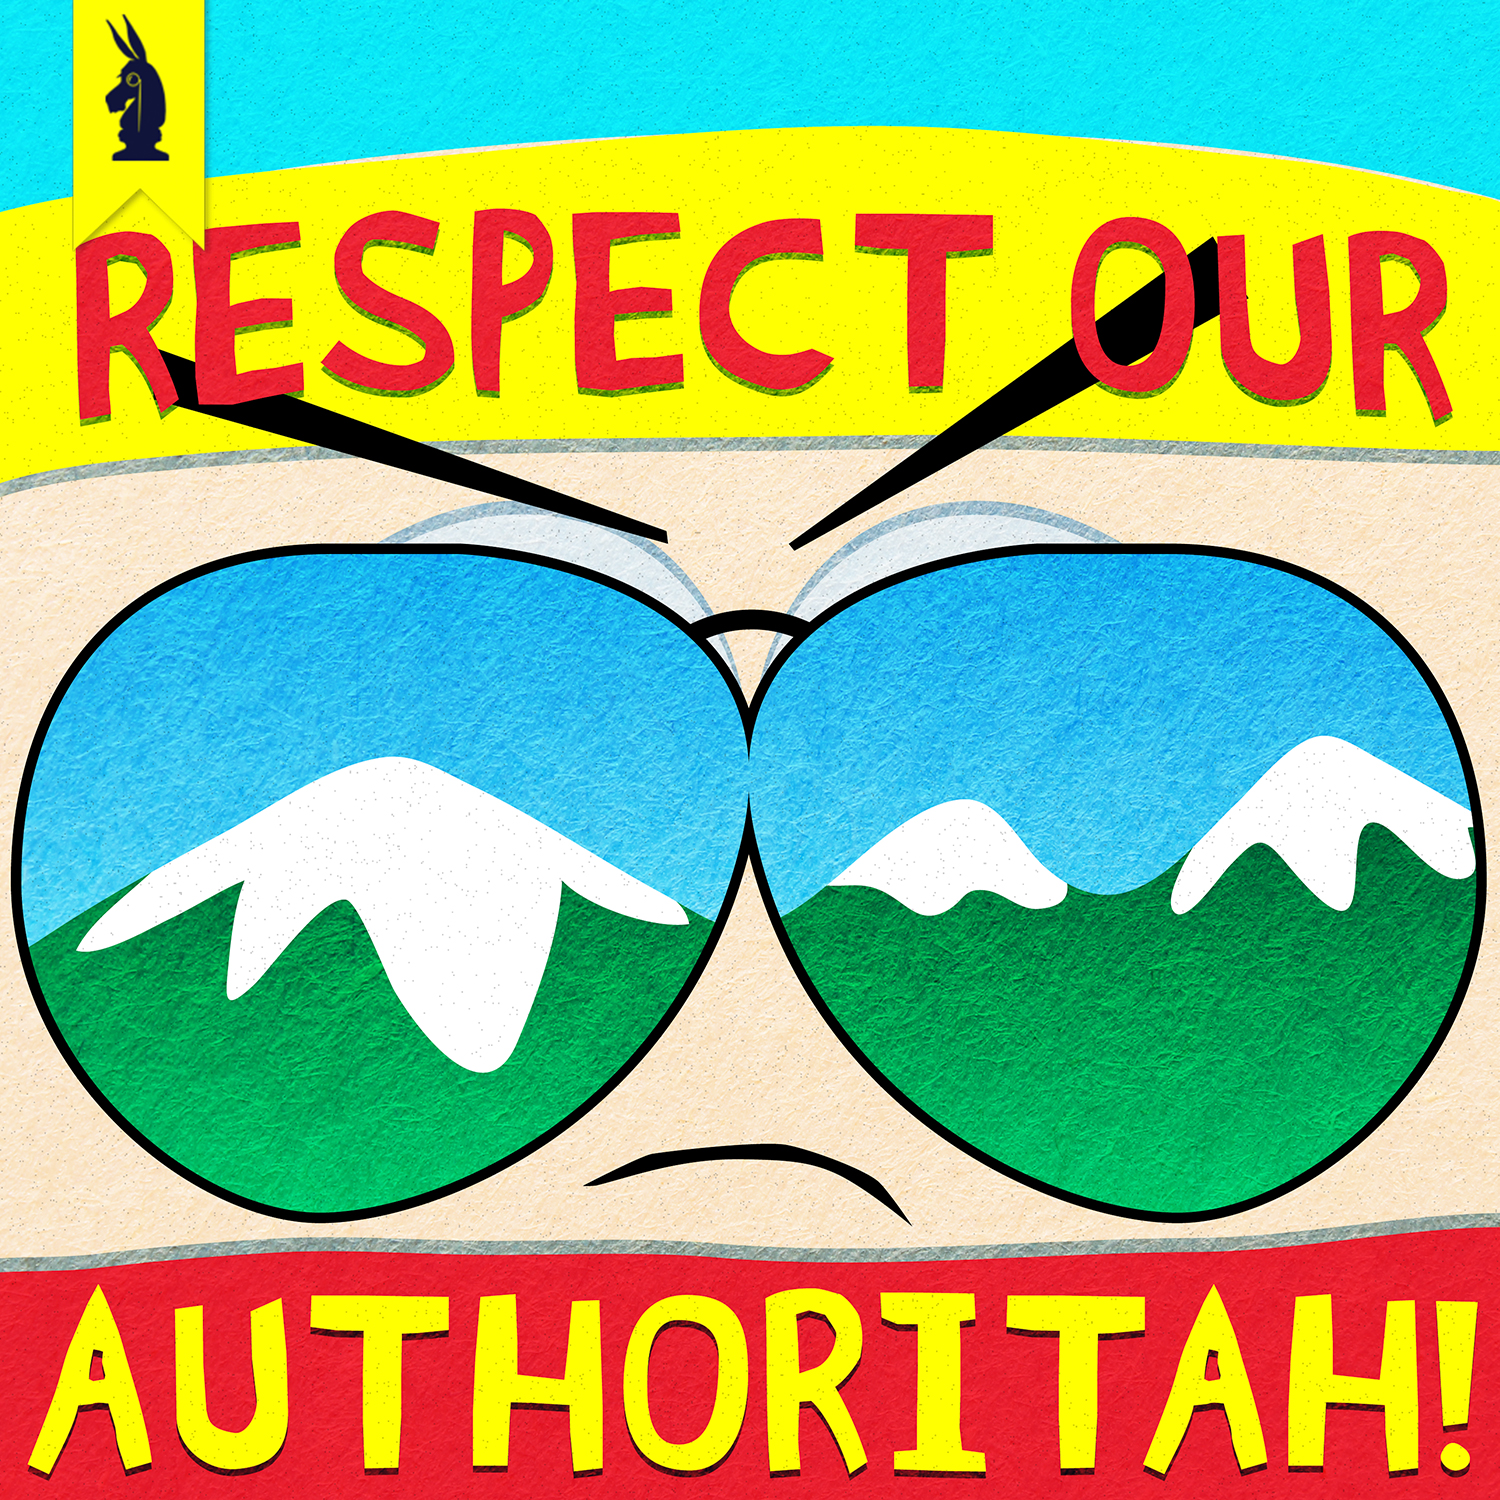 Respect Our Authoritah! – A SOUTH PARK Podcast by Wisecrack